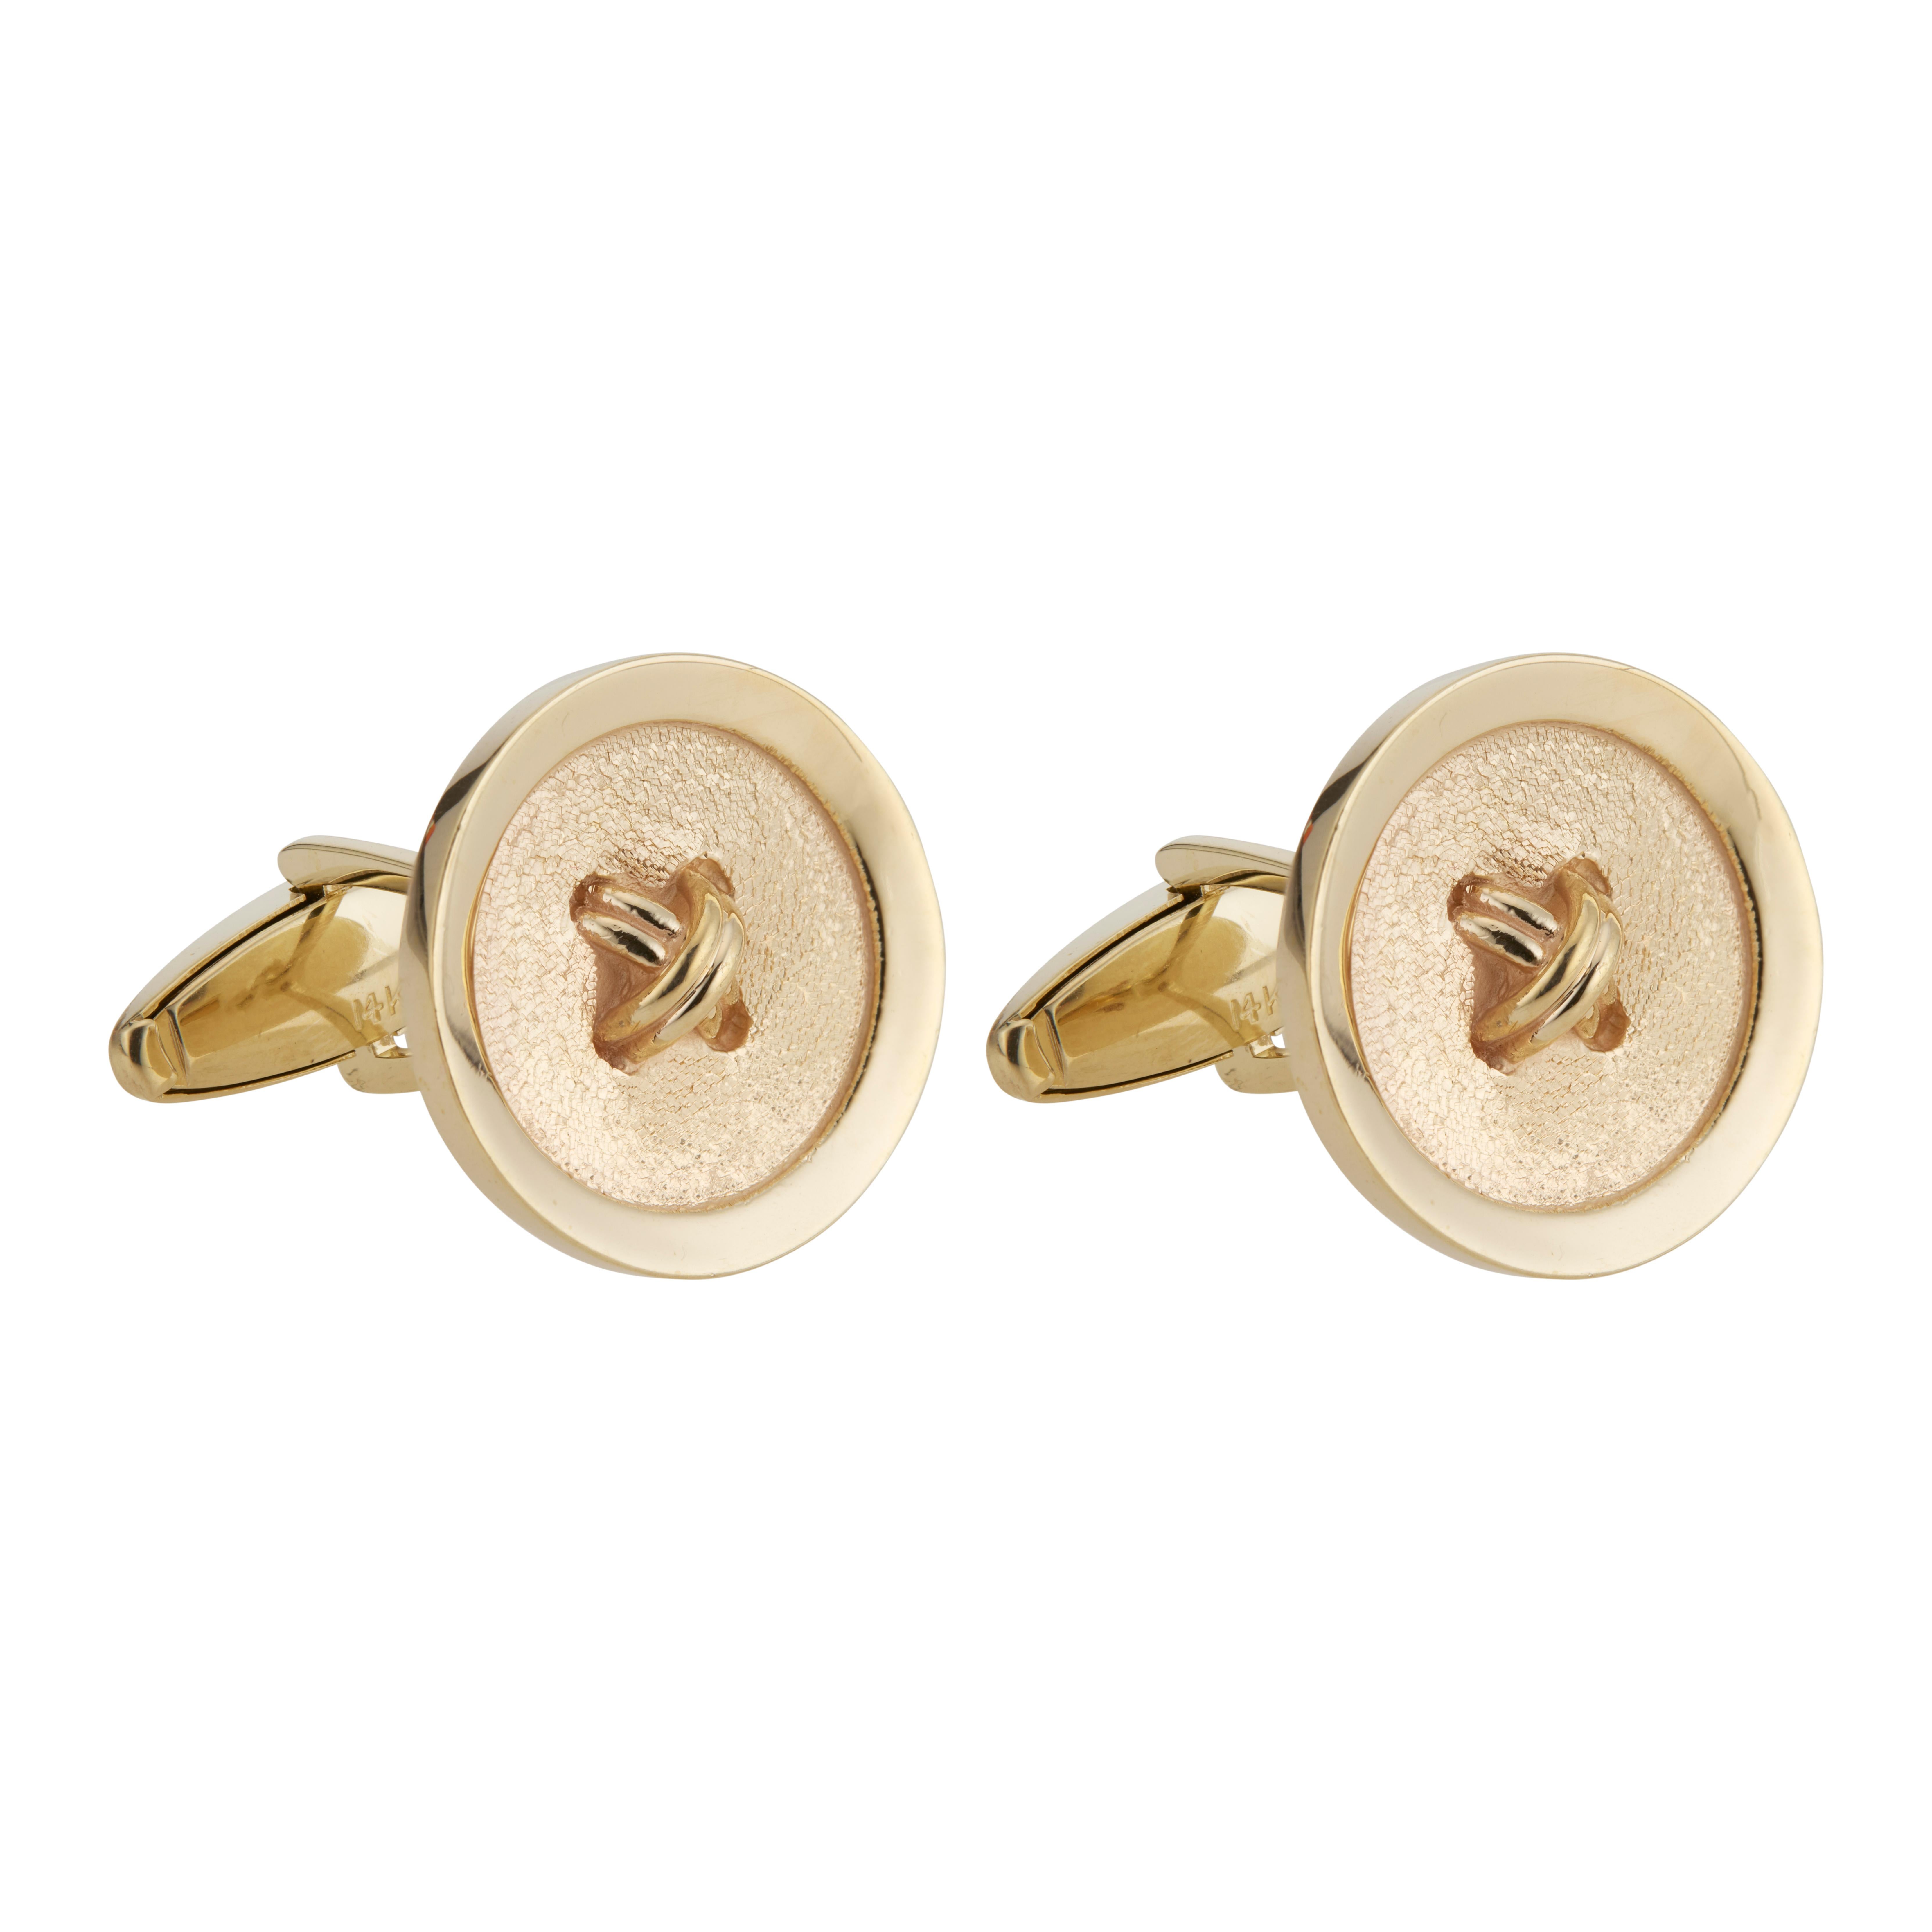 Textured button style 14k yellow gold men's cufflinks. circa 1970

14k yellow gold 
Stamped: 14k
16.7 grams
Top to bottom: 20.3mm or .75 Inch
Width: 20.3mm or .75 Inch
Depth or thickness: 2.6mm
